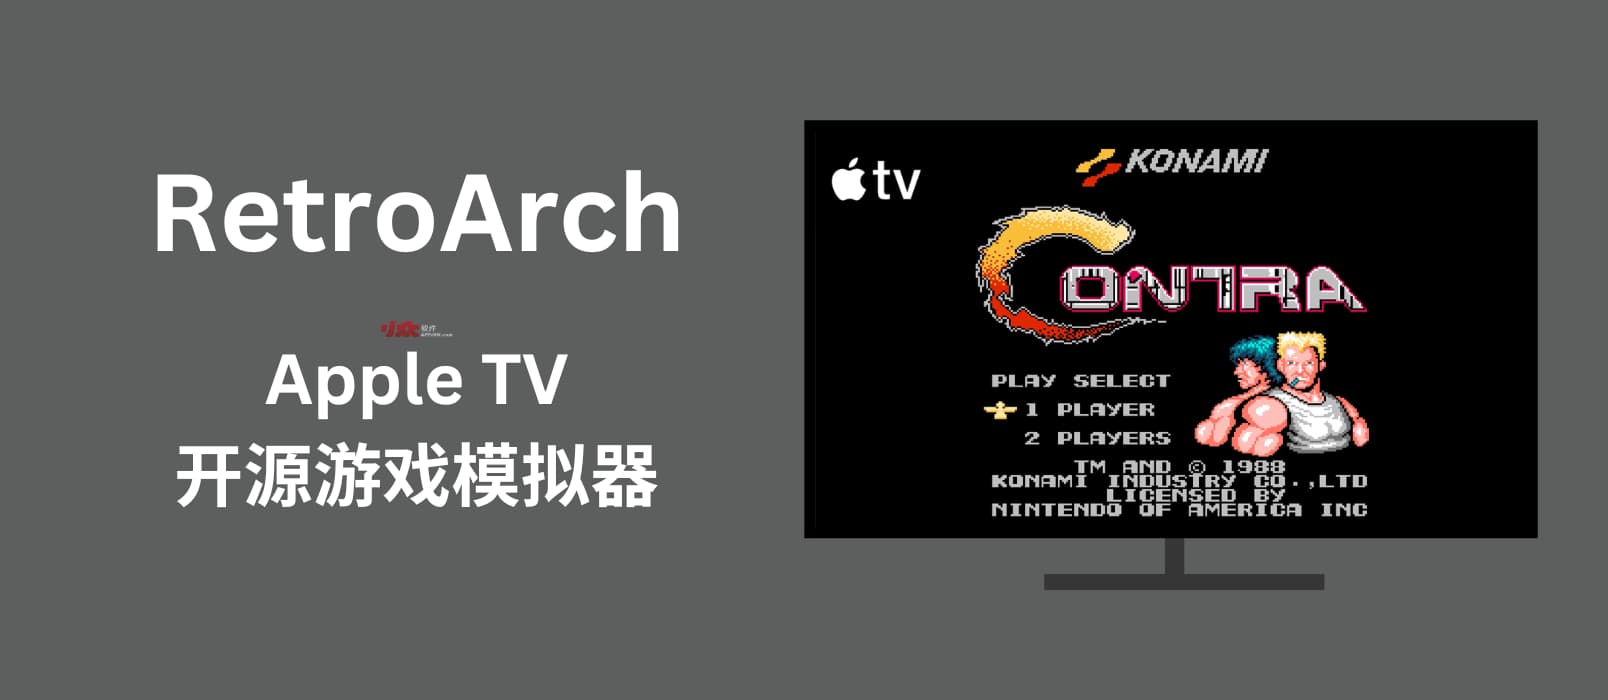  RetroArch - Open source game simulator for use on Apple TV